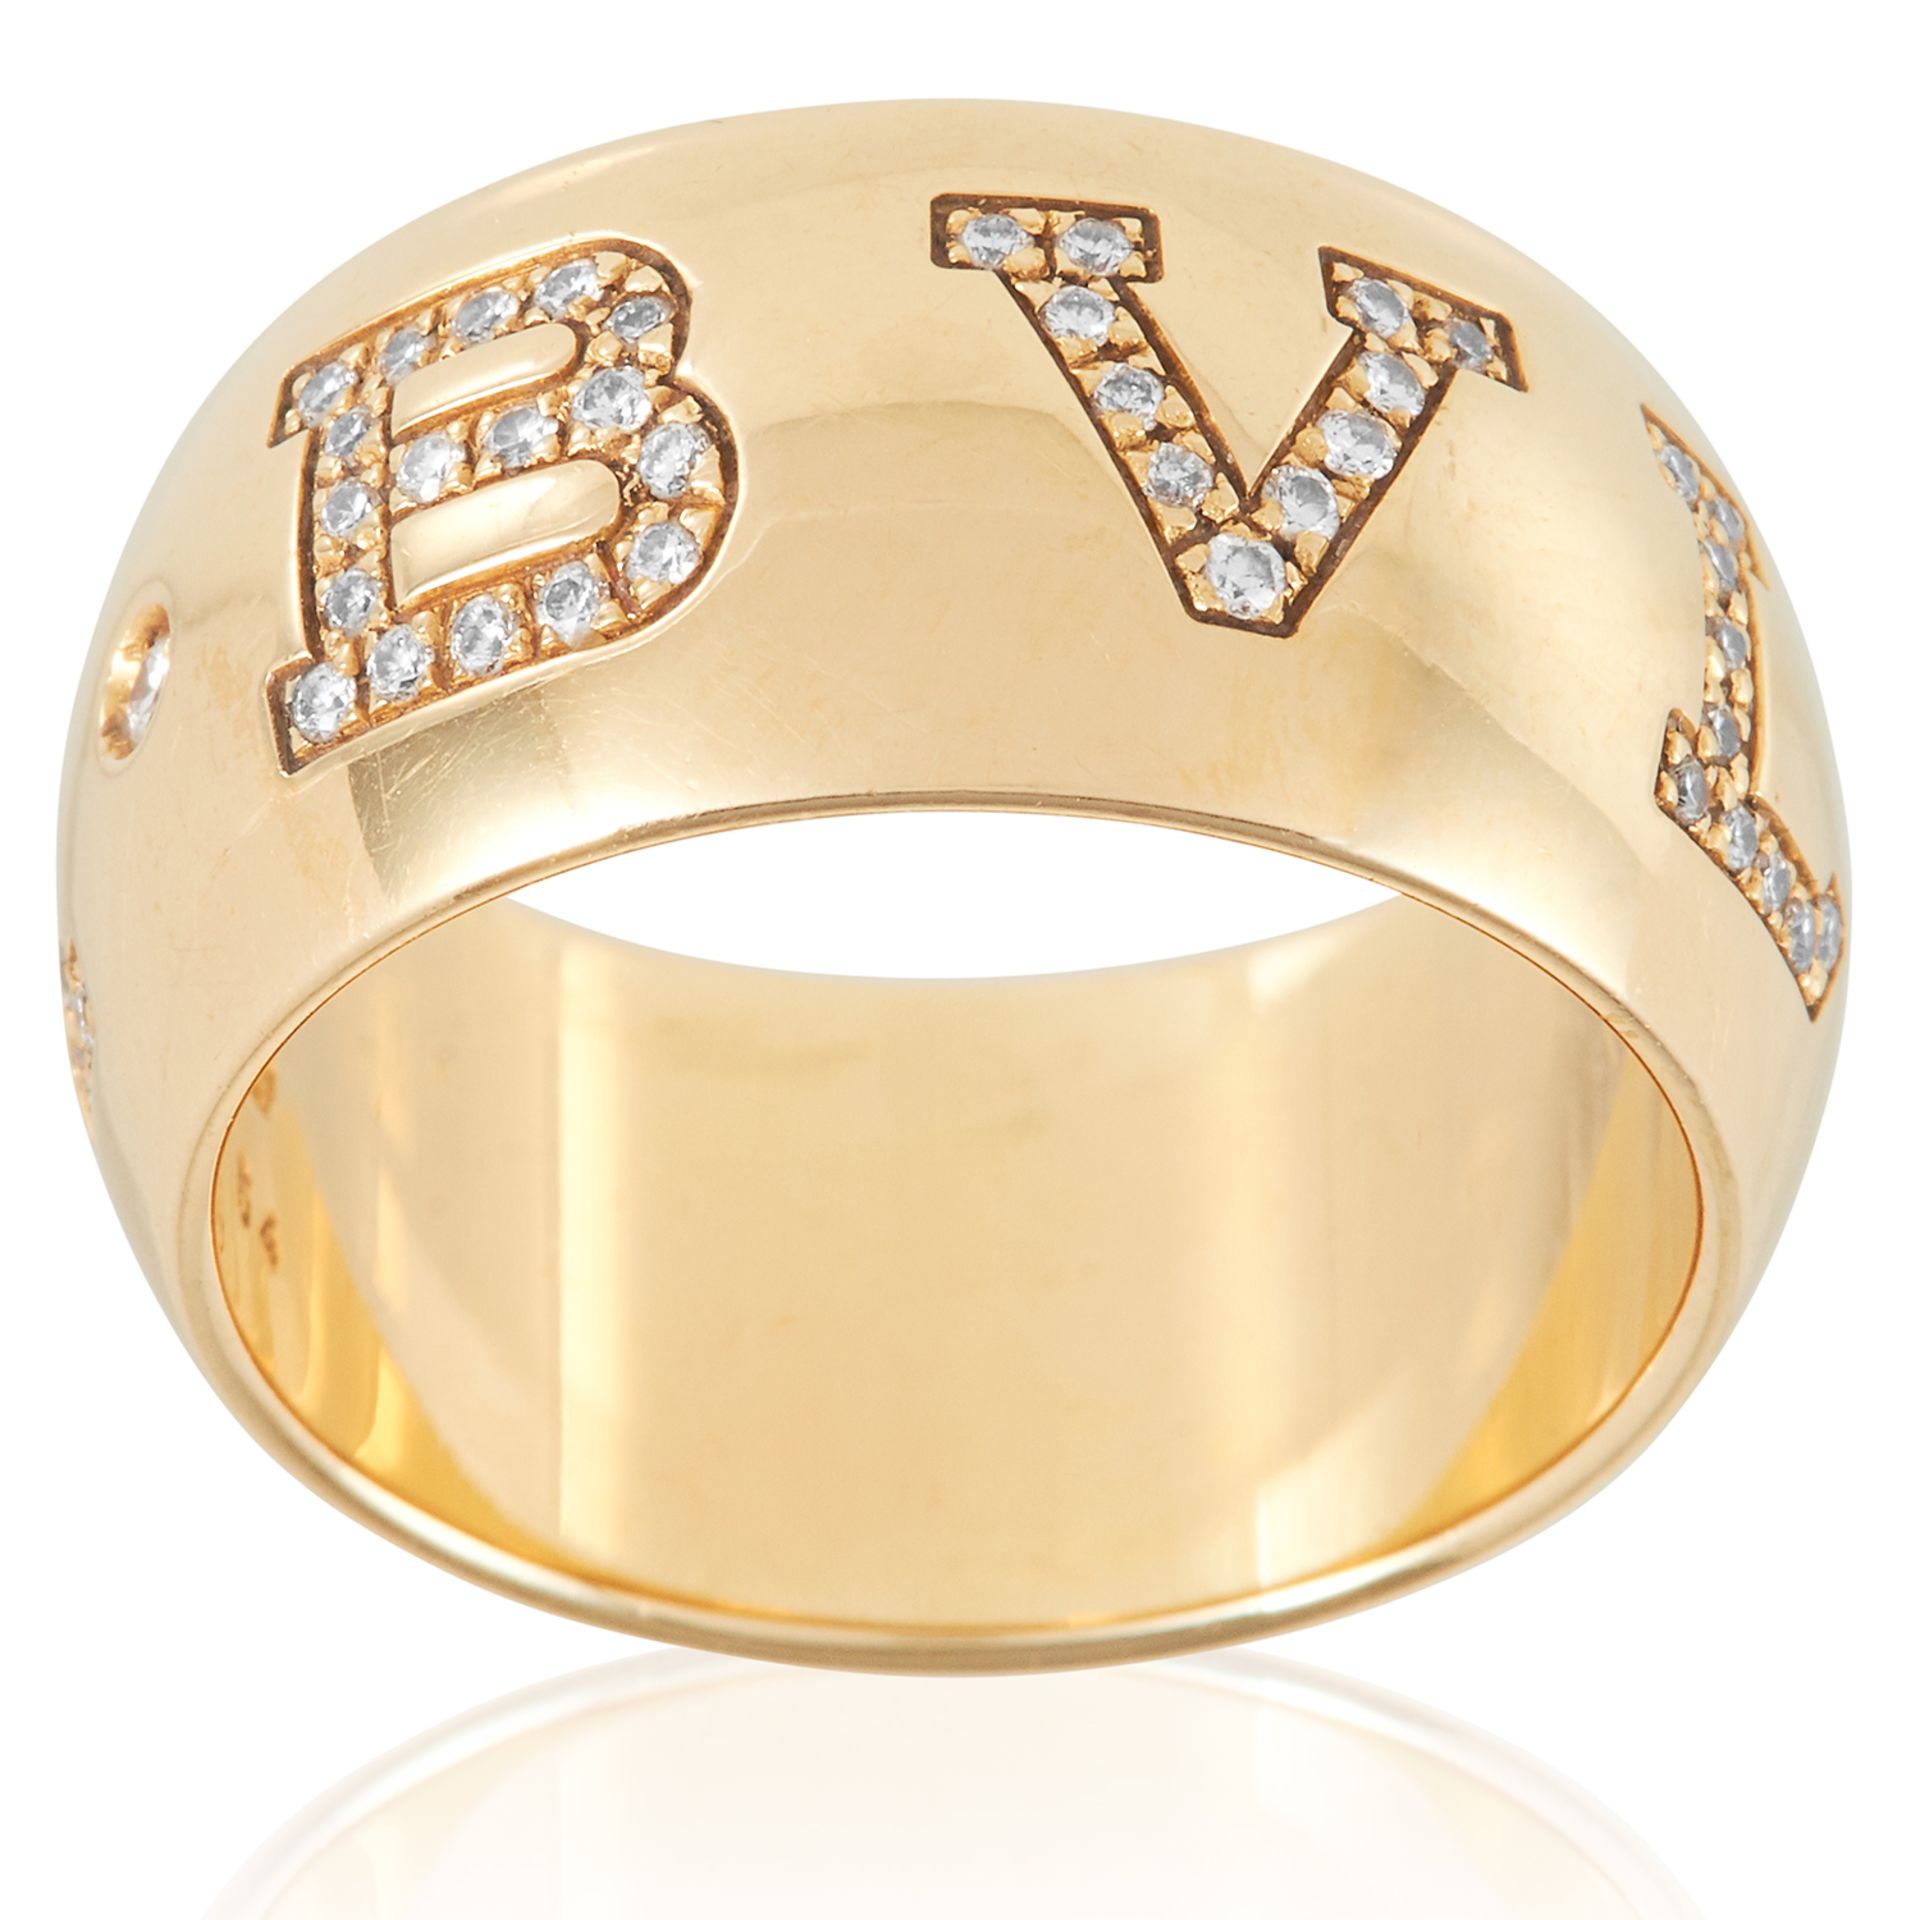 A DIAMONG MONOLOGO RING, BULGARI in 18ct yellow gold, the bevelled band signed BVLGARI, jewelled